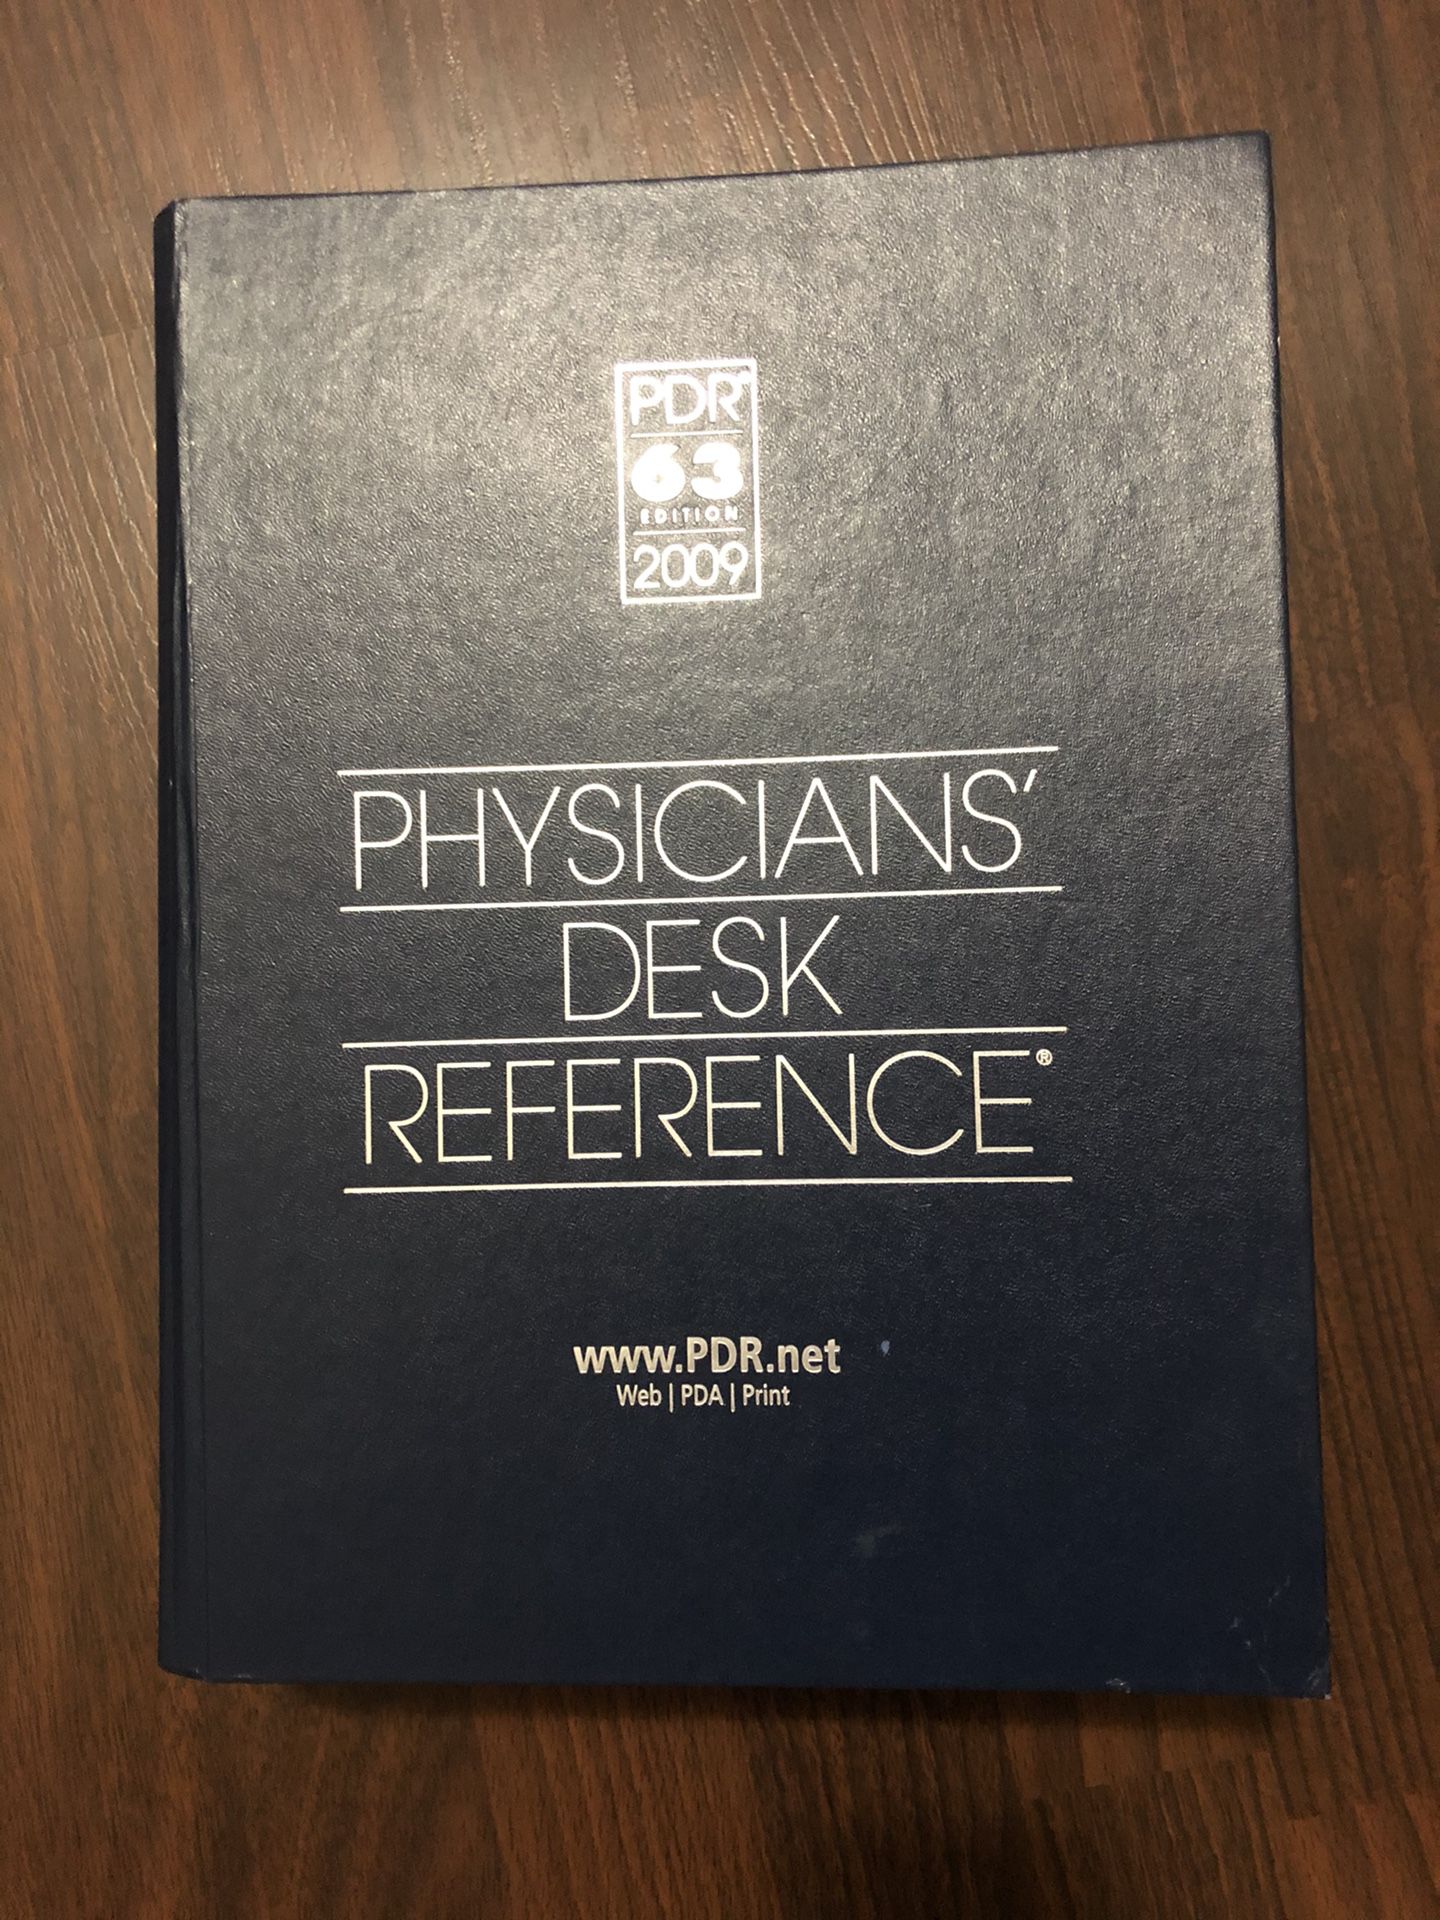 2009 PDR (Physicans Desk Reference)